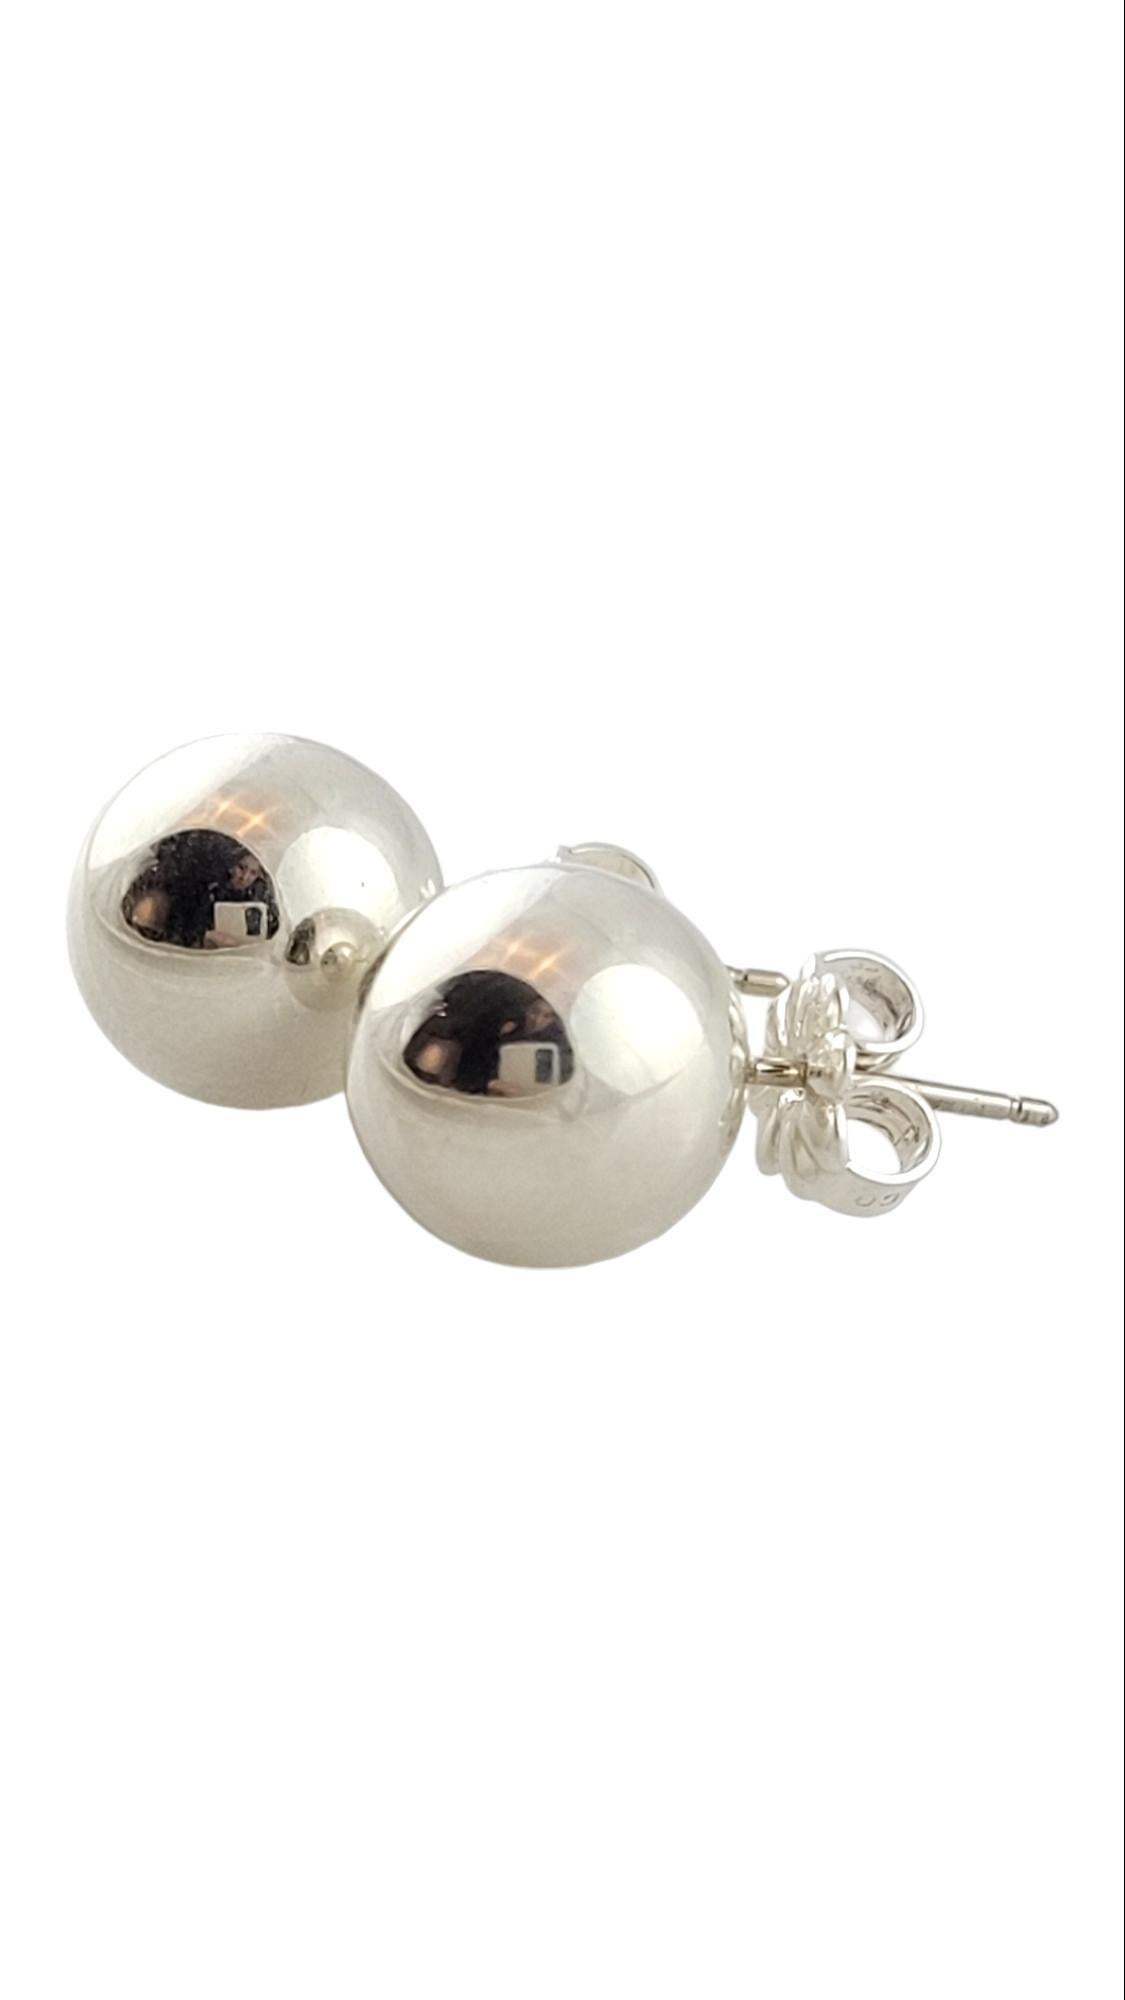 Tiffany & co Sterling Silver Ball Stud Earrings w/ Tiffany Box

These gorgeous studs by designer Tiffany & Co. are crafted from beautiful 925 sterling silver!

Size: 10mm

Weight: 4.68 g/ 3.01 dwt

Hallmark: T&Co 925

Will be packaged in a gift box